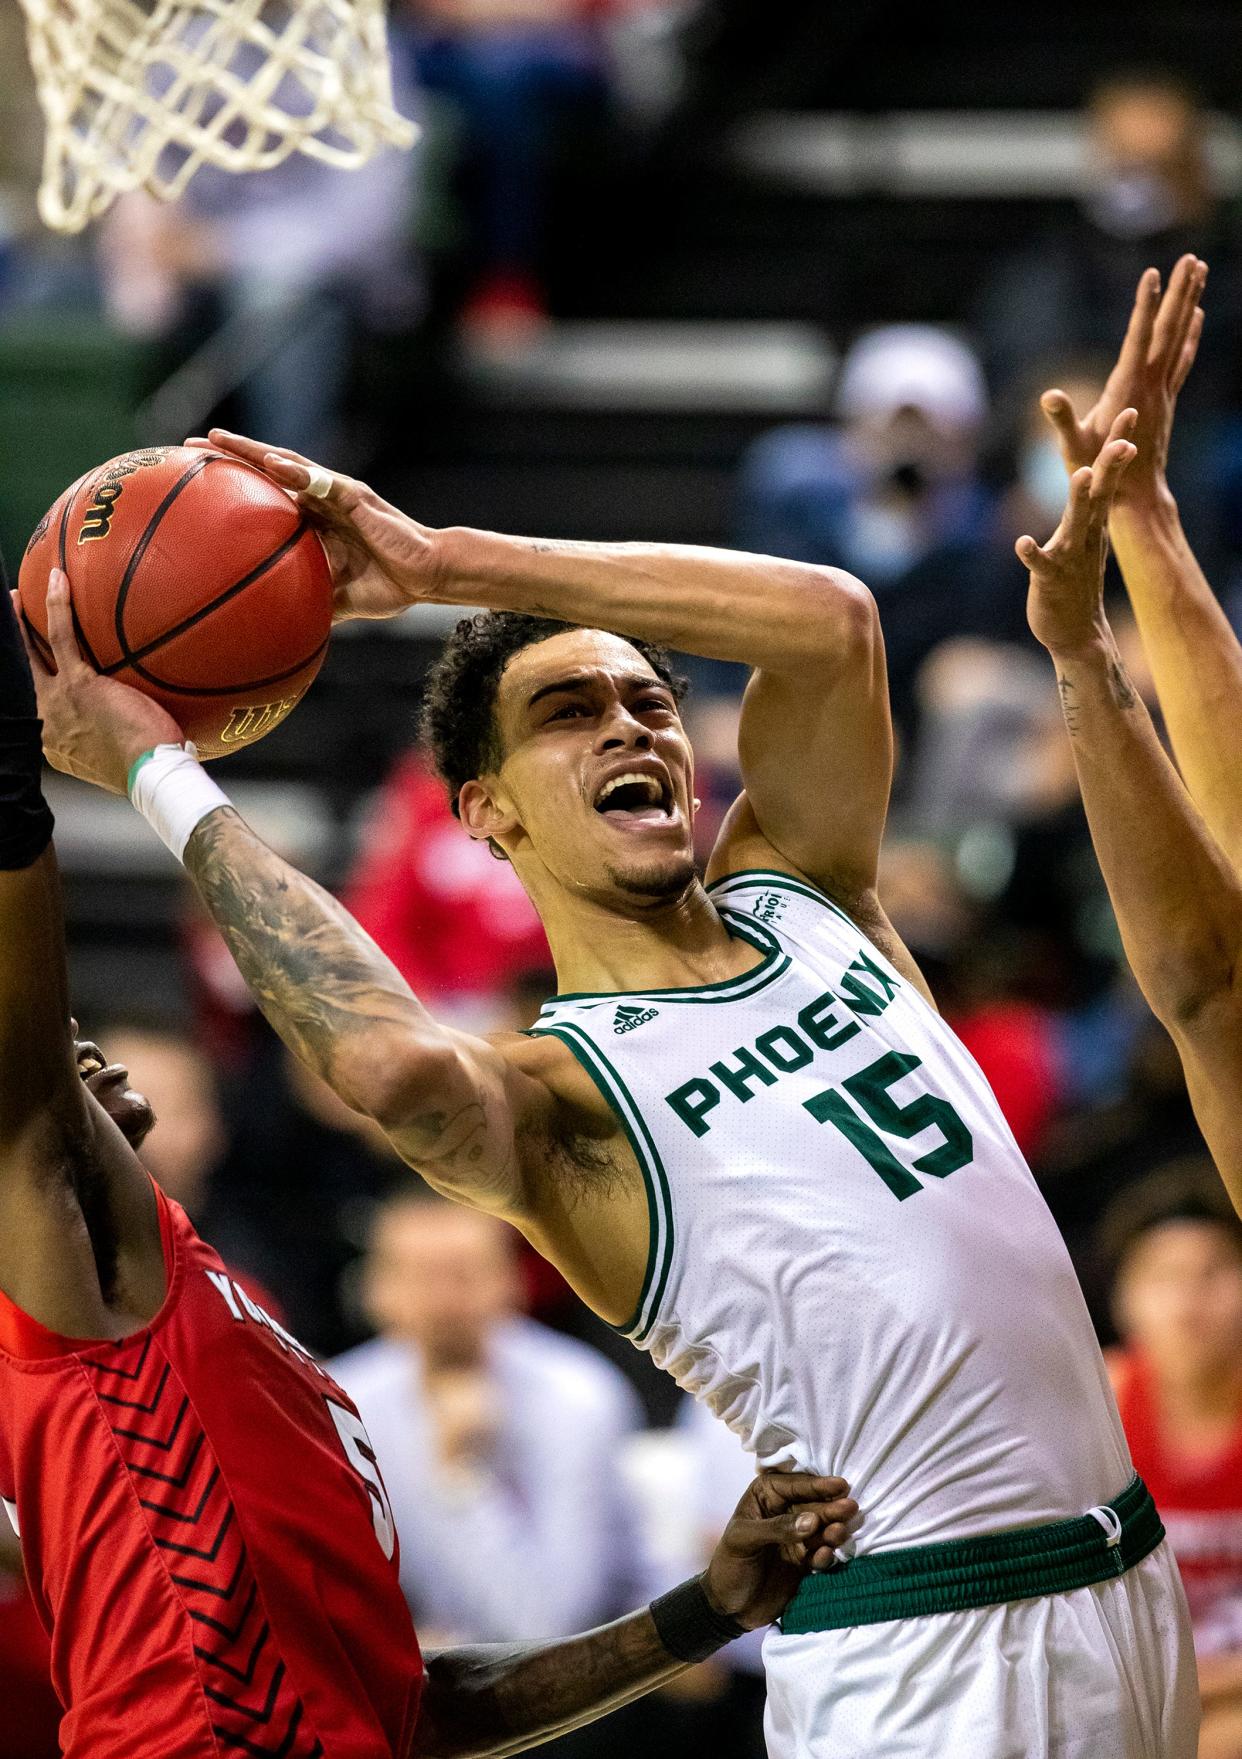 Donovan Ivory played in 15 games for UWGB this season.